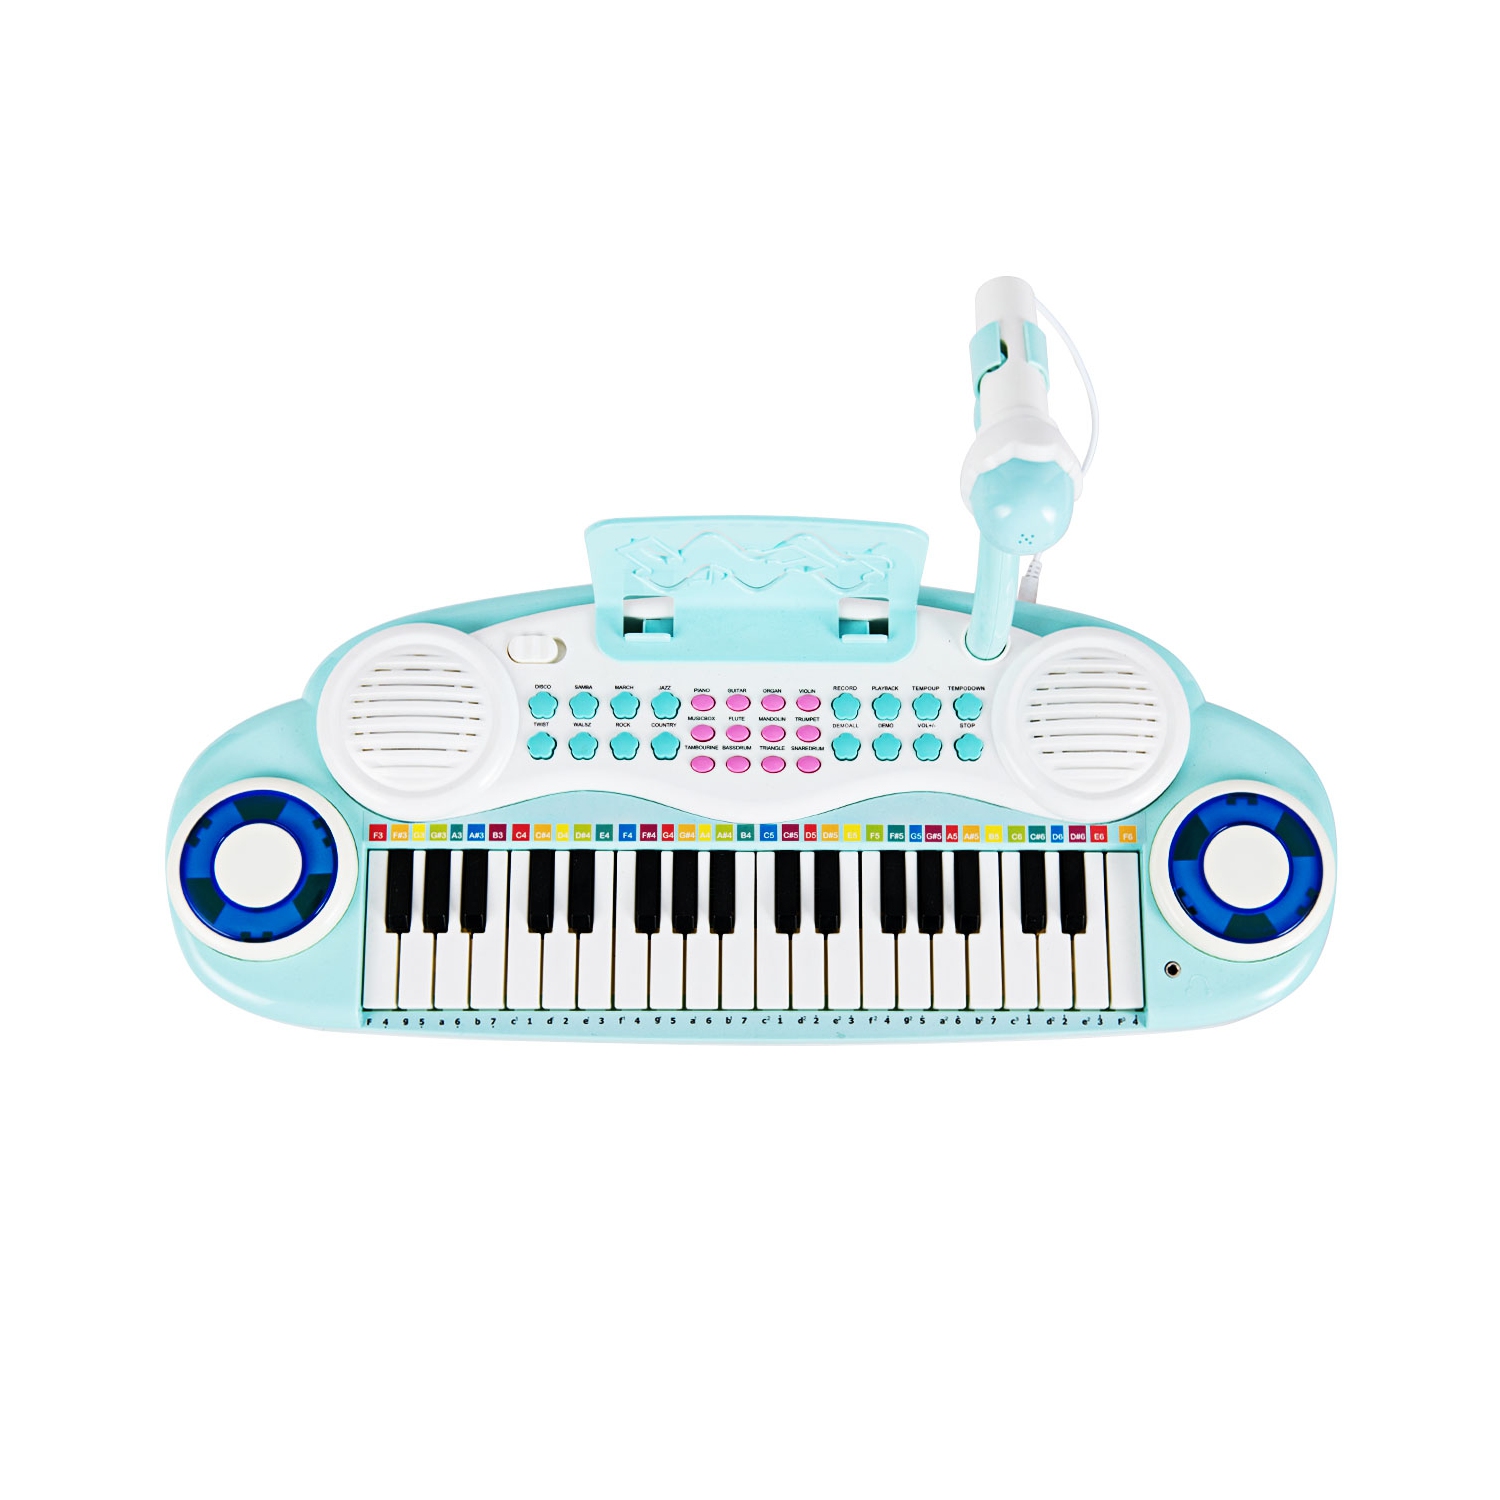 TWFRIC Kids Piano Keyboard 37 Keys Piano for Kids Music Piano Keyboard Multifunction Keyboard Teaching Toys with Microphone MP3 Music Function for Beginners Children Age 3-8 Year Old 